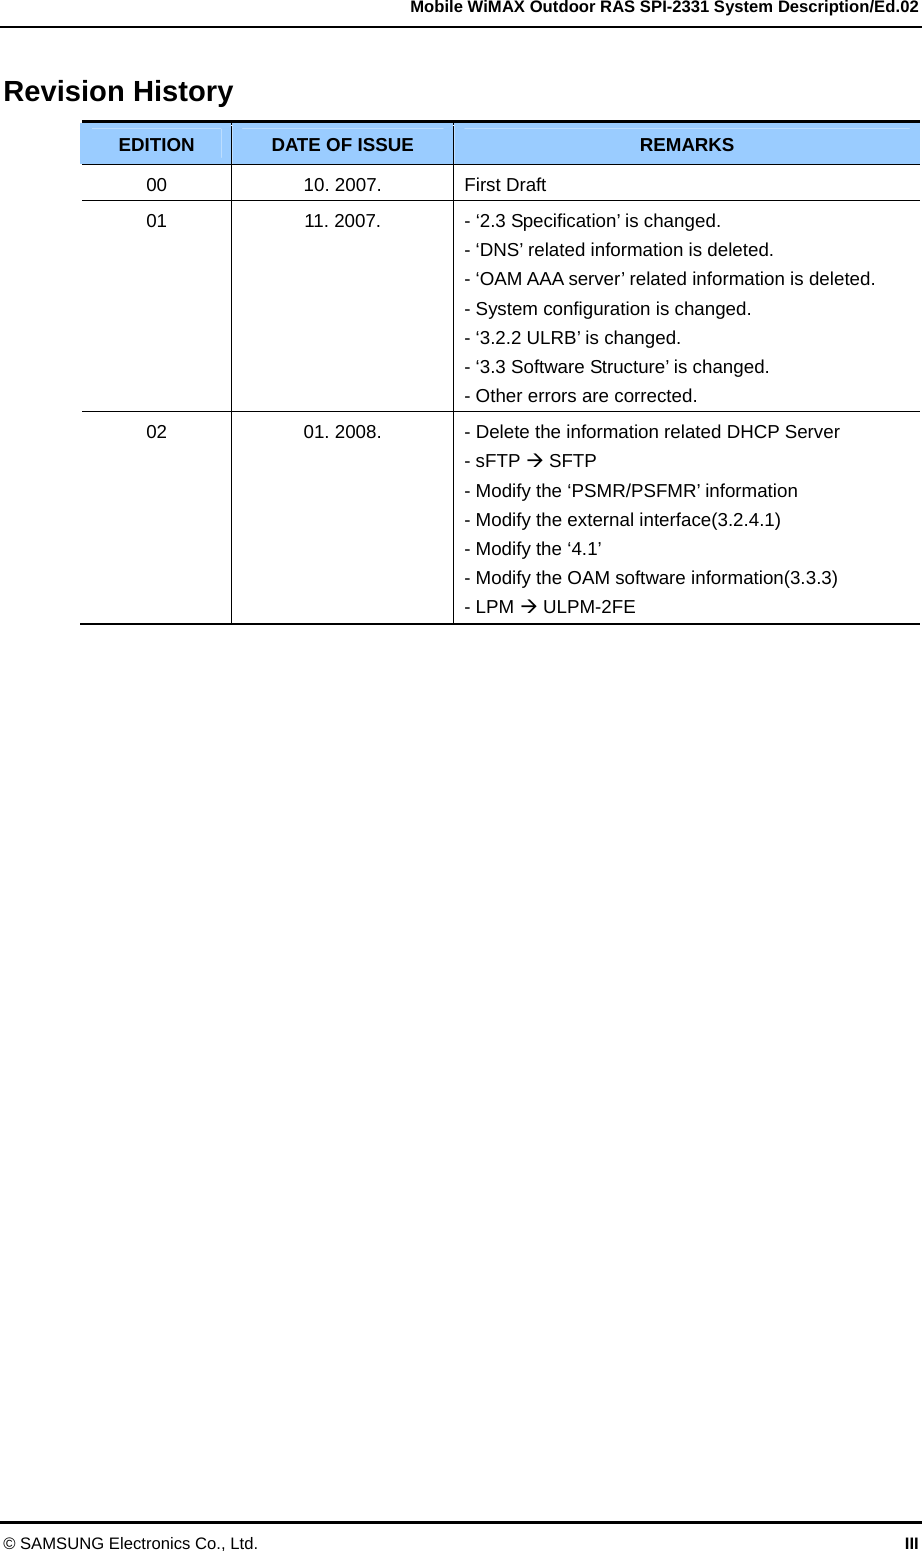   Mobile WiMAX Outdoor RAS SPI-2331 System Description/Ed.02 © SAMSUNG Electronics Co., Ltd.  III Revision History EDITION  DATE OF ISSUE  REMARKS 00  10. 2007.  First Draft 01  11. 2007.  - ‘2.3 Specification’ is changed. - ‘DNS’ related information is deleted. - ‘OAM AAA server’ related information is deleted. - System configuration is changed.   - ‘3.2.2 ULRB’ is changed. - ‘3.3 Software Structure’ is changed. - Other errors are corrected. 02  01. 2008.  - Delete the information related DHCP Server - sFTP Æ SFTP - Modify the ‘PSMR/PSFMR’ information - Modify the external interface(3.2.4.1) - Modify the ‘4.1’ - Modify the OAM software information(3.3.3) - LPM Æ ULPM-2FE  